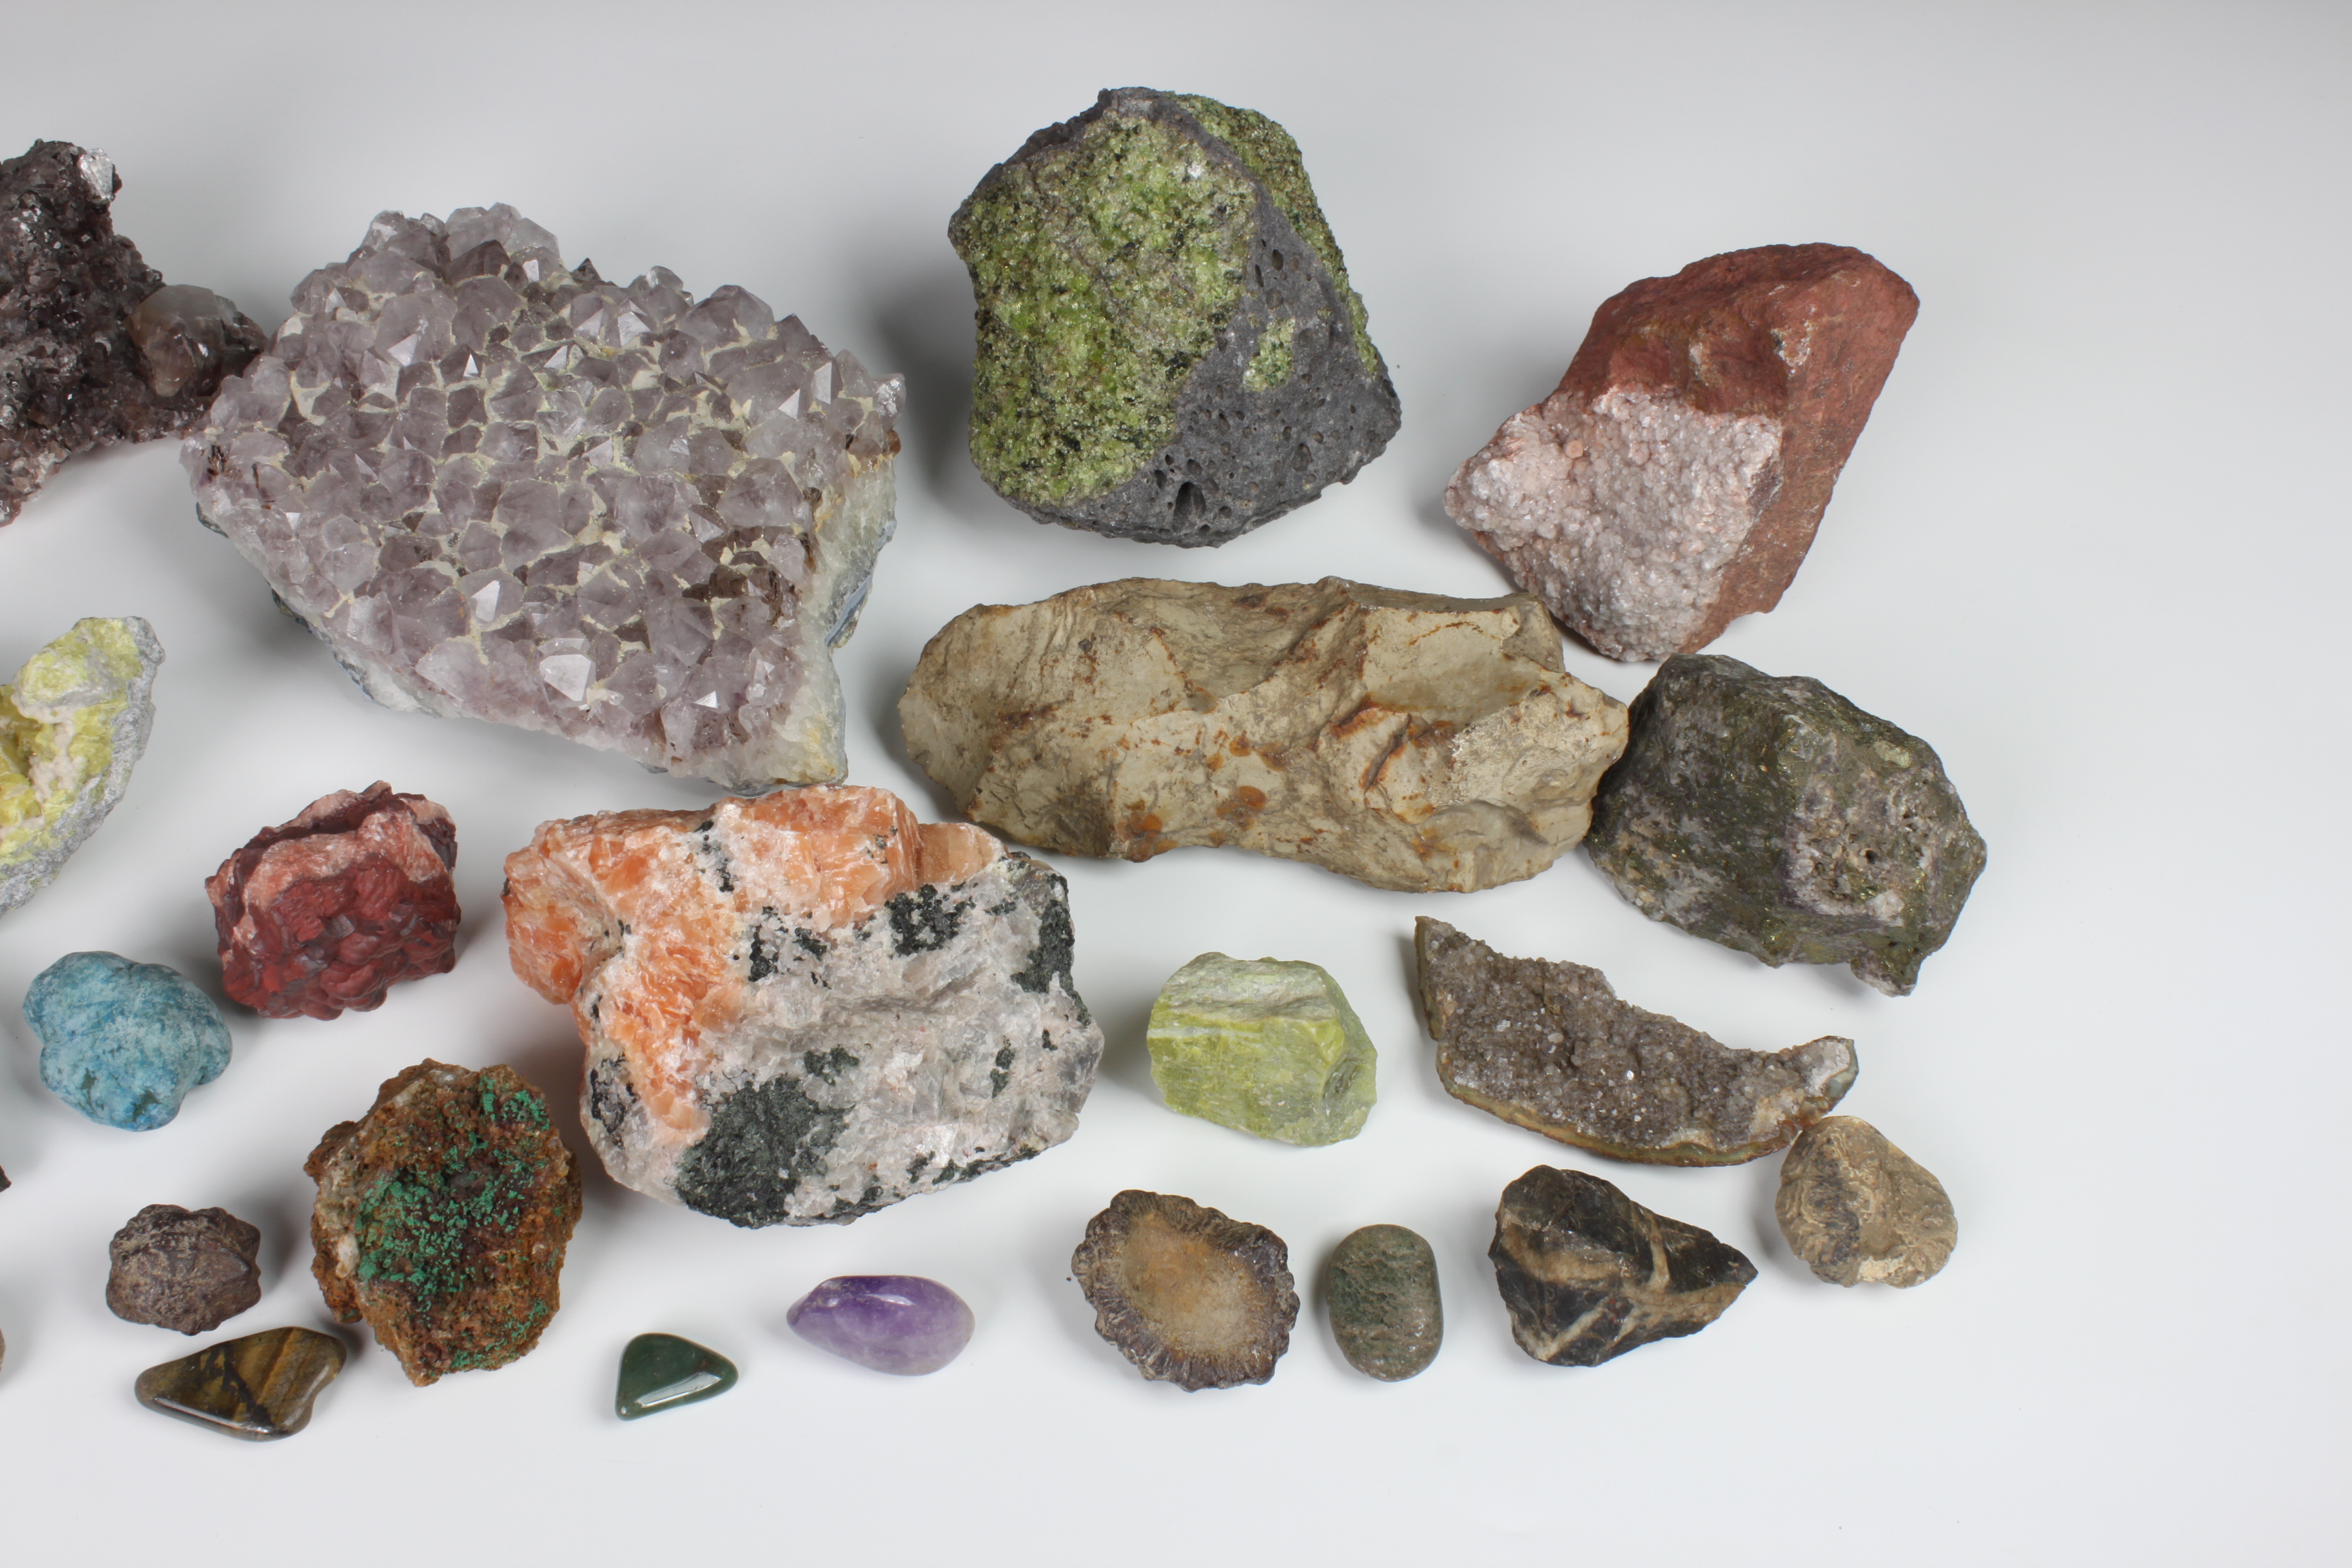 NATURAL HISTORY - A collection of various mineral specimens - fossils etc. - Image 3 of 3